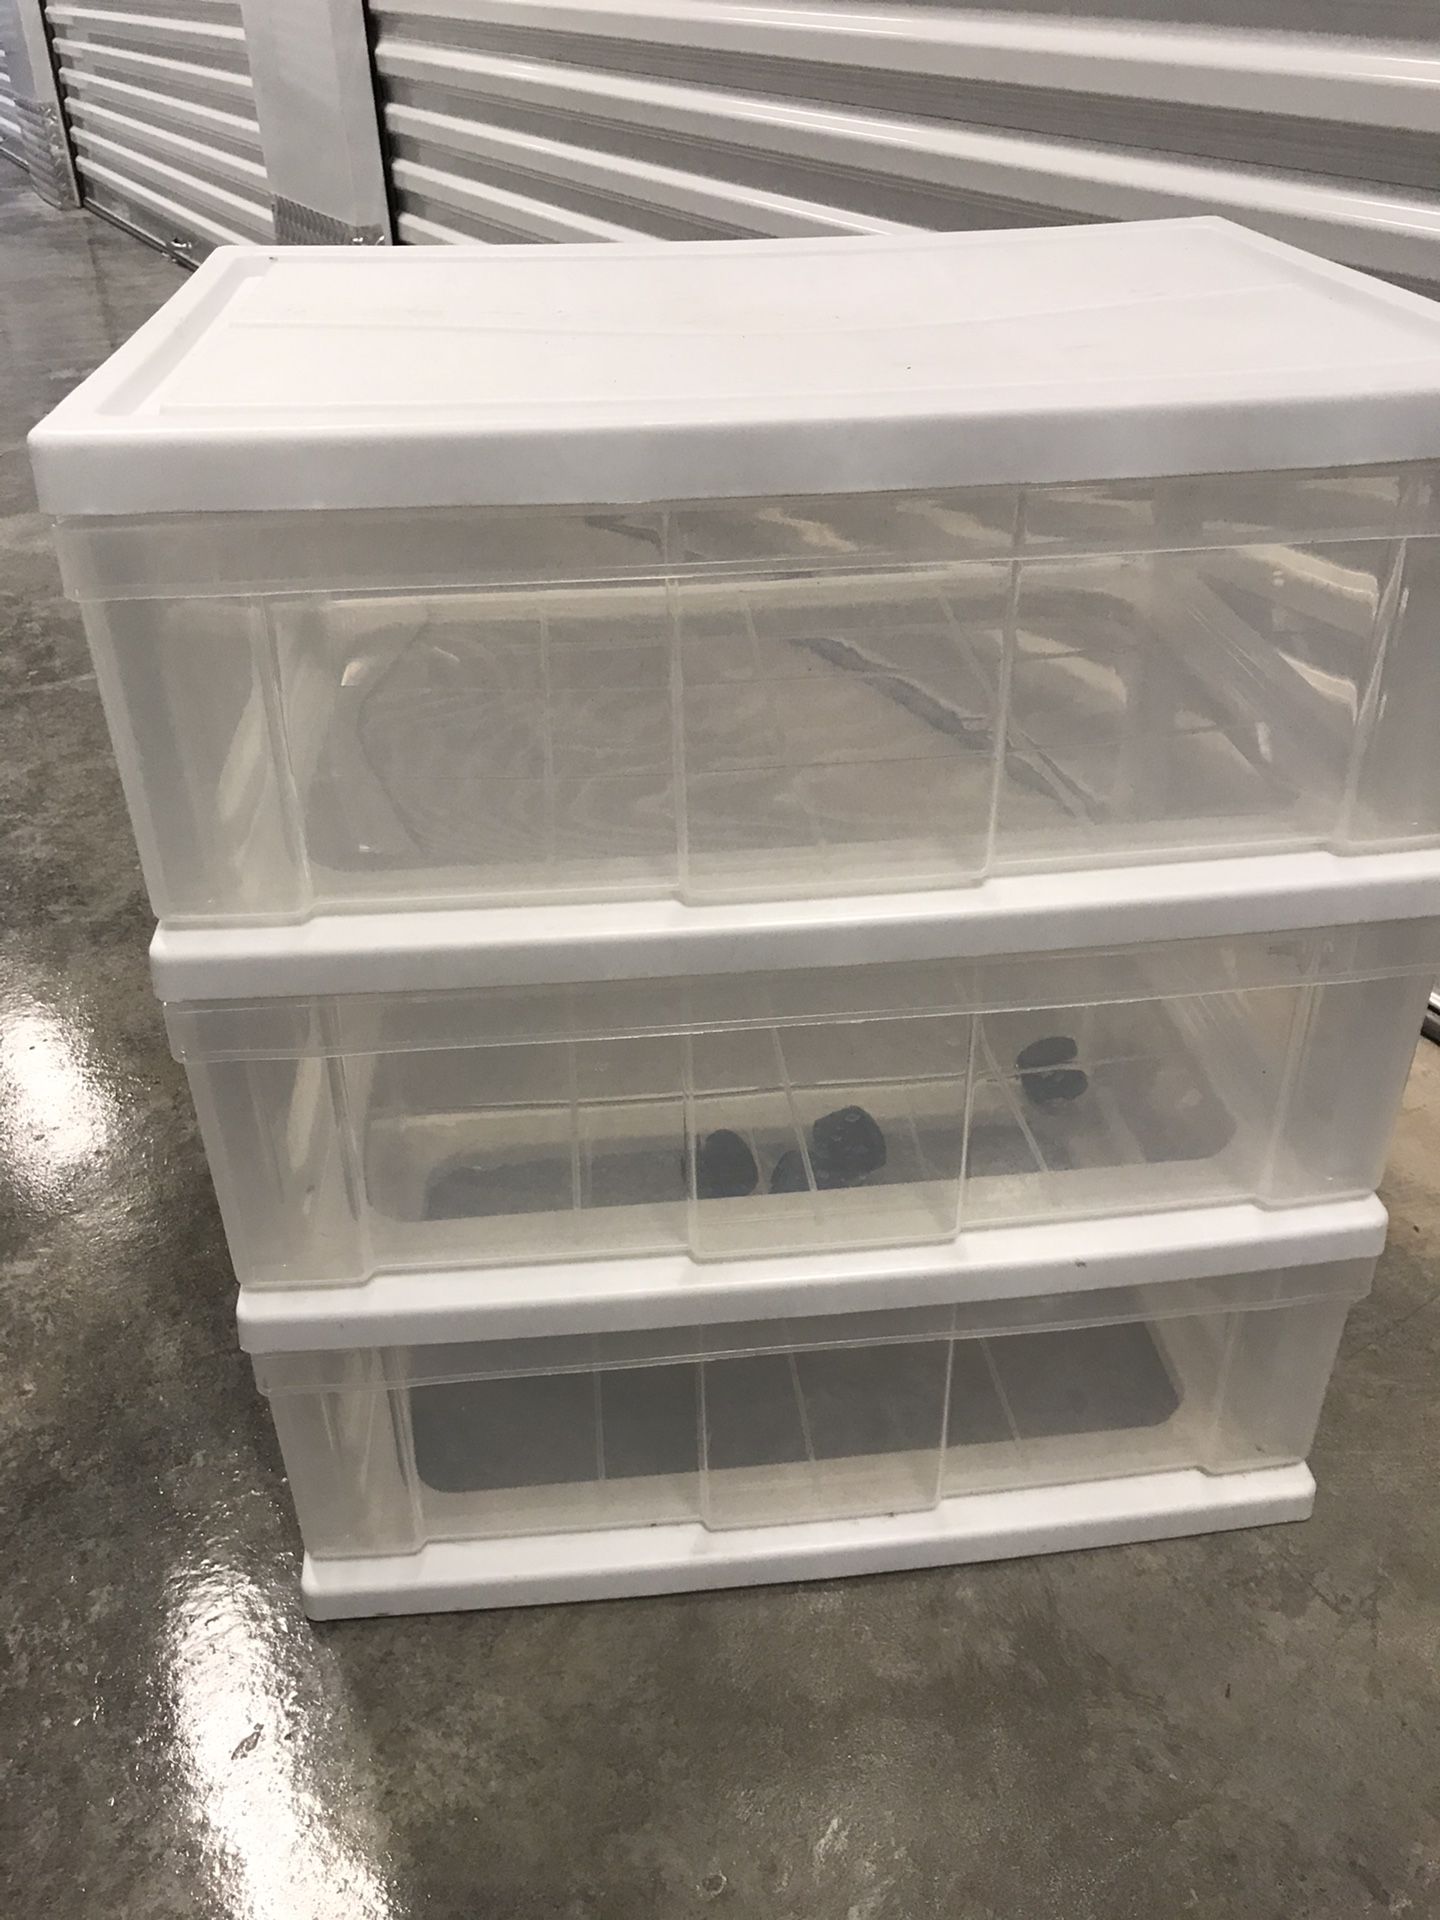 Plastic drawers for $15